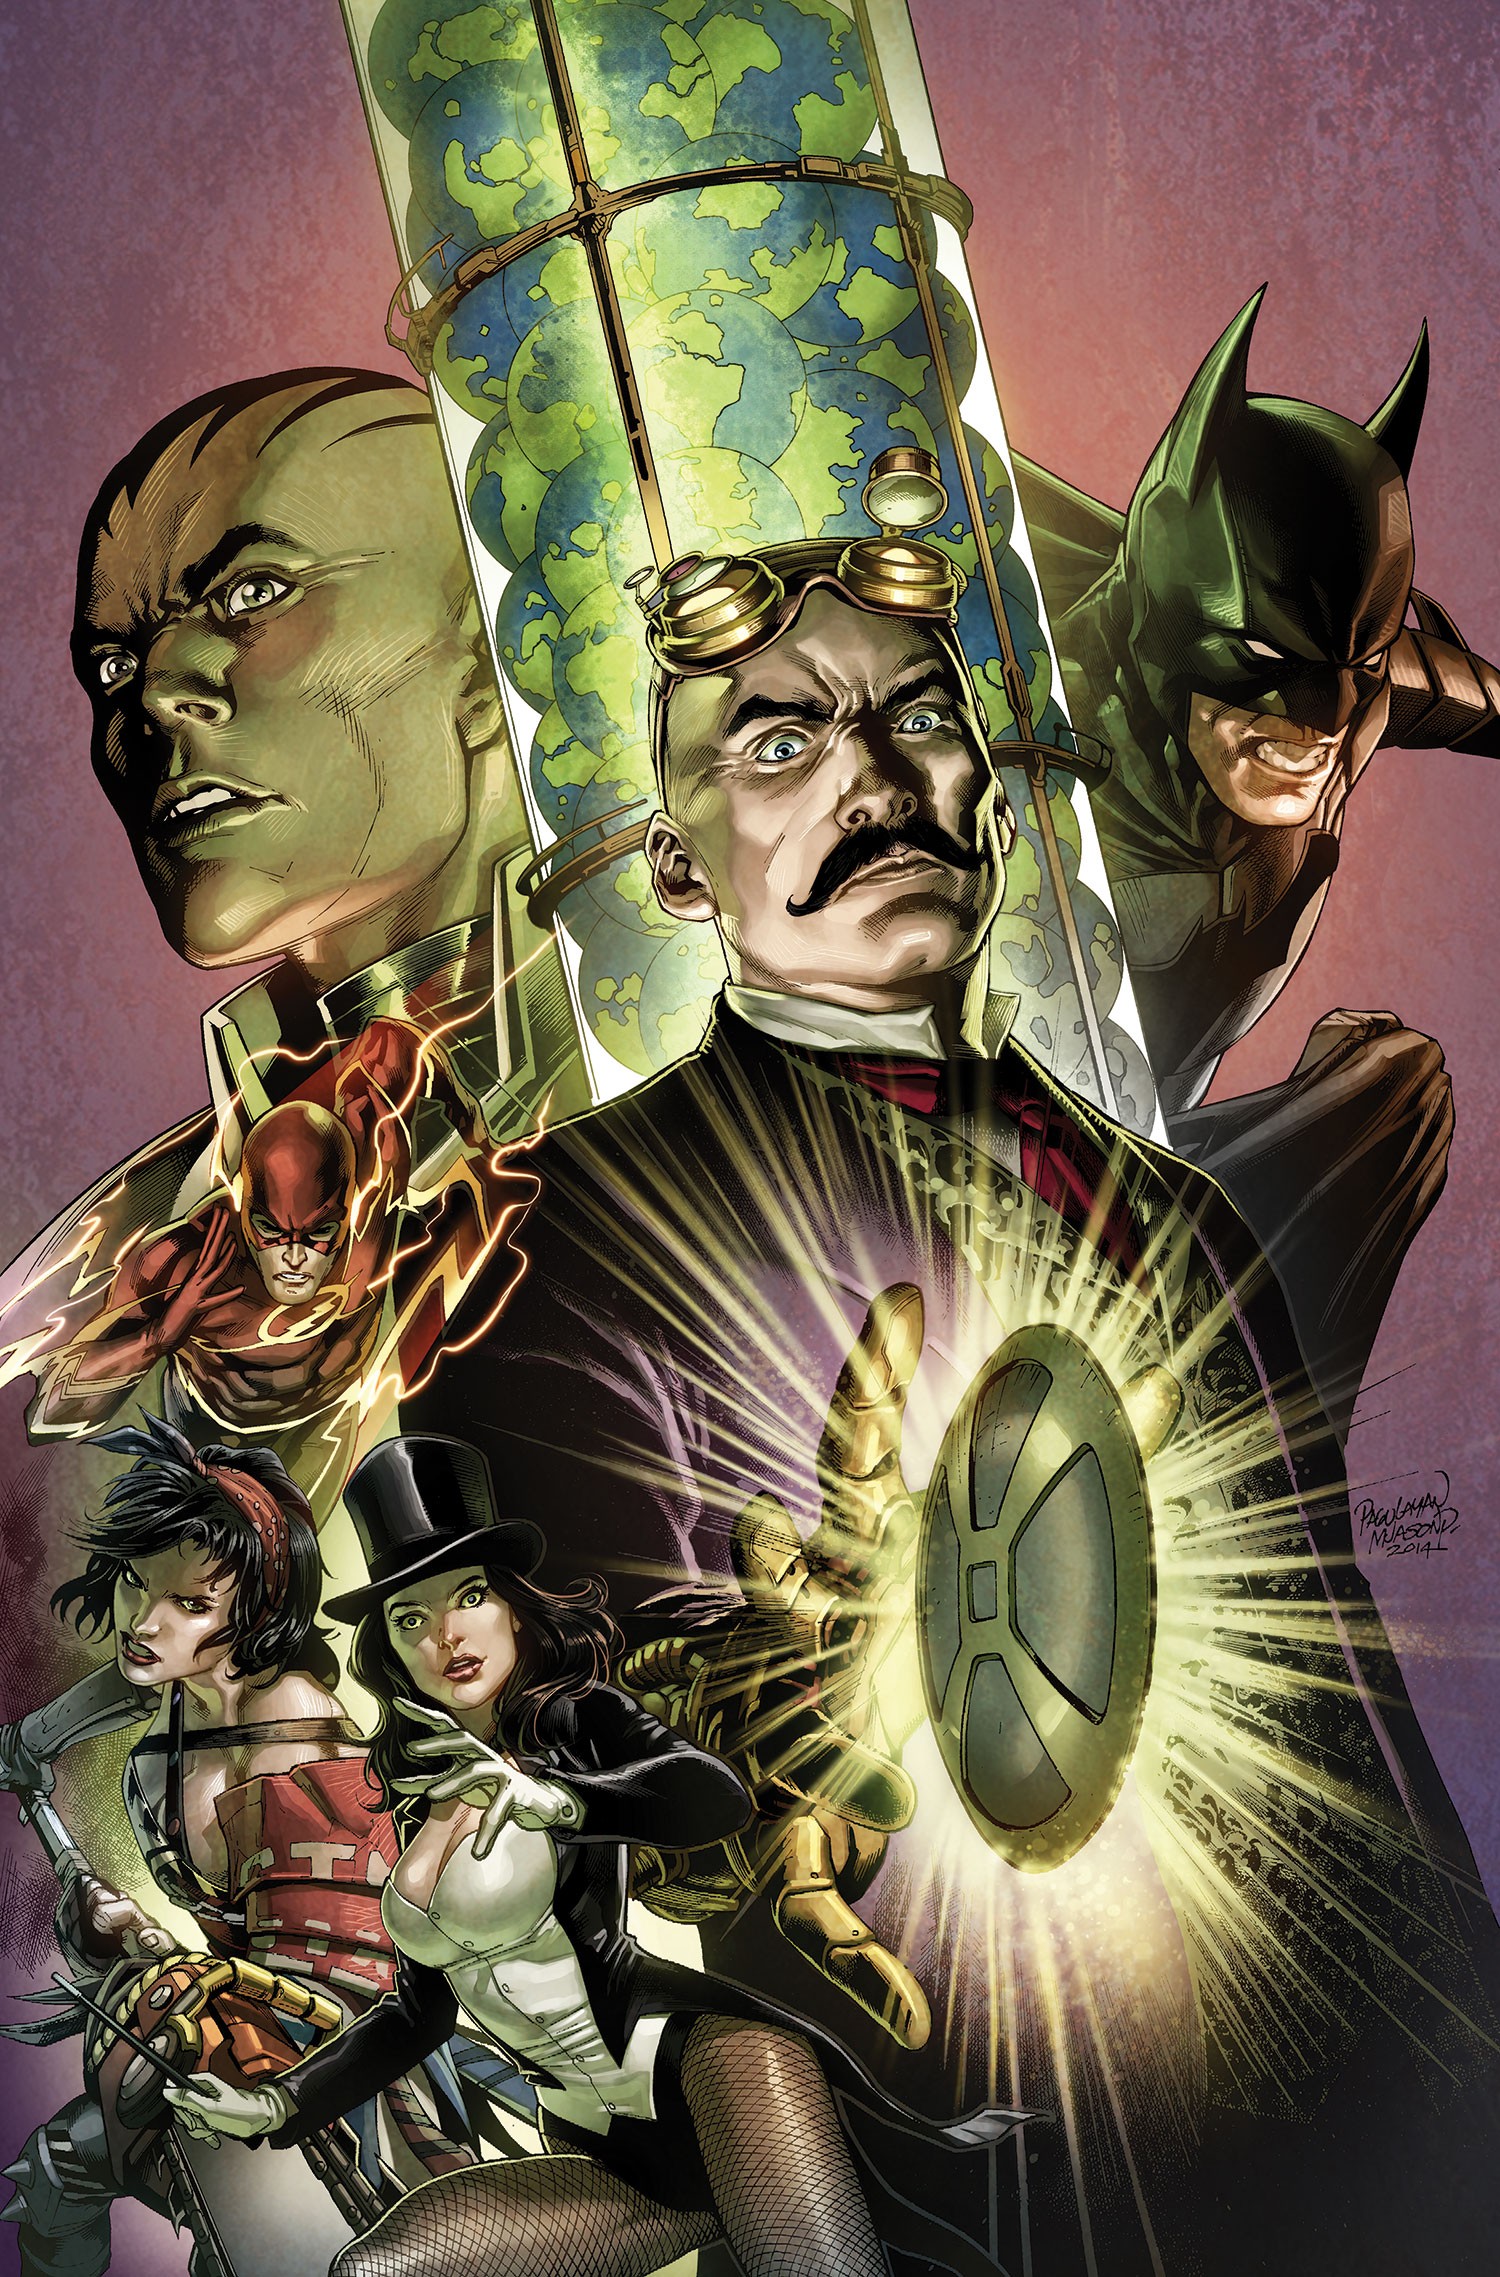 Infinite Crisis: The Fight for the Multiverse Vol. 1 #8